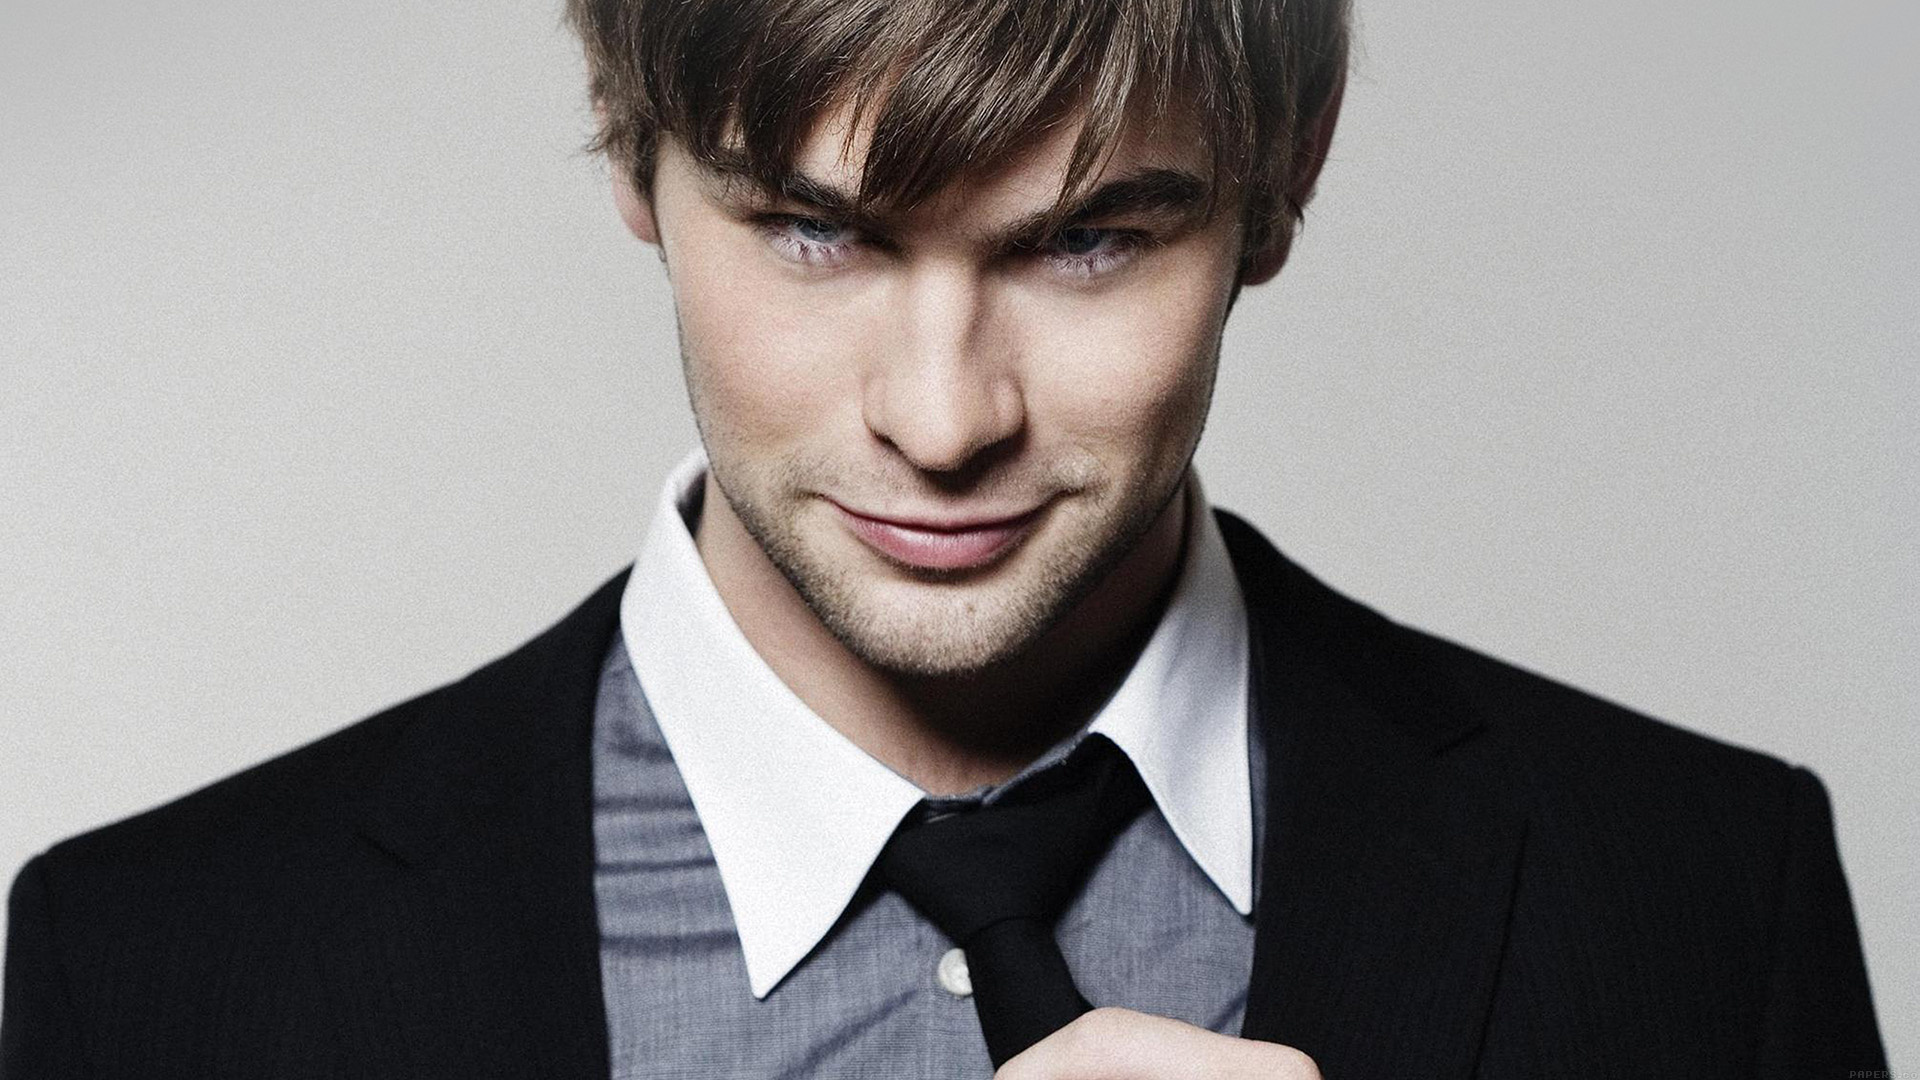 Chace Crawford, Handsome celebrity, Chace movie star, Actor HD, 1920x1080 Full HD Desktop